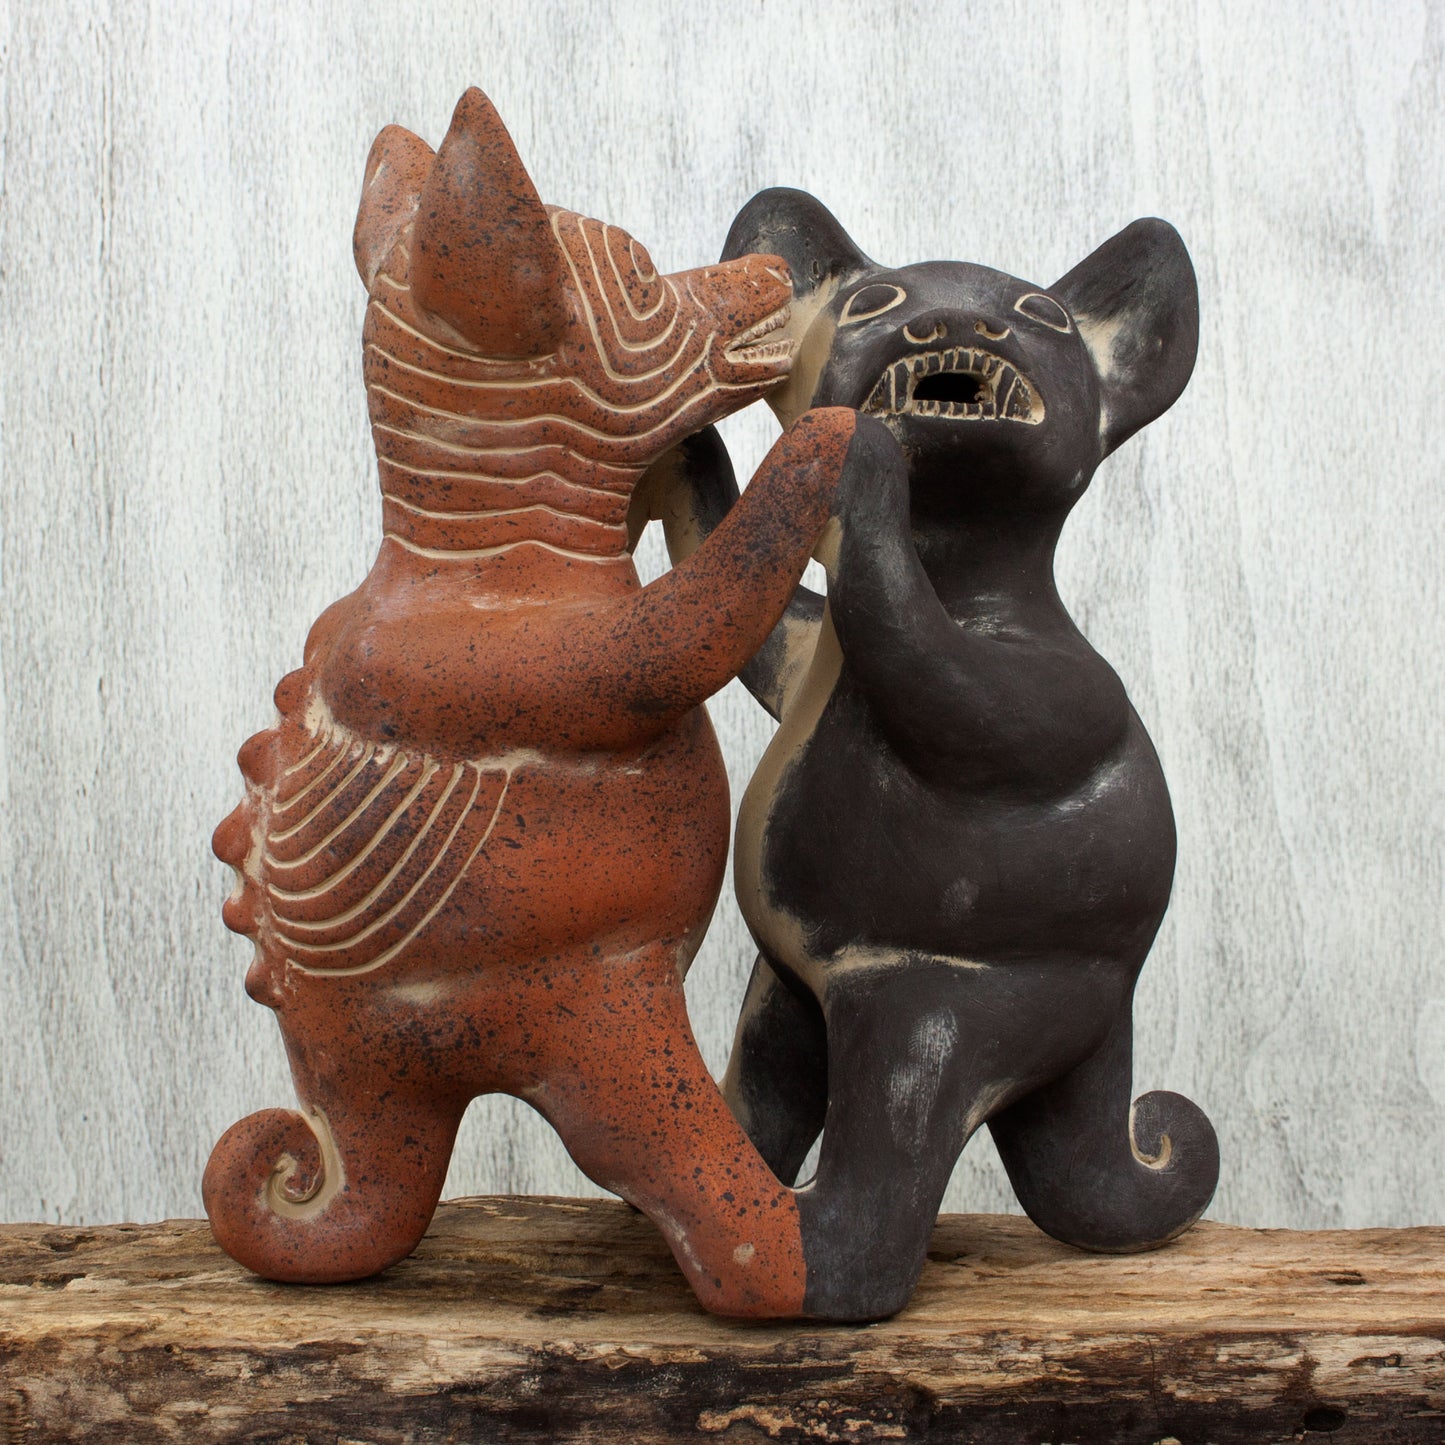 Dancing Colima Dogs Mexico Pre Hispanic Museum Replica Figurine Crafted by Hand